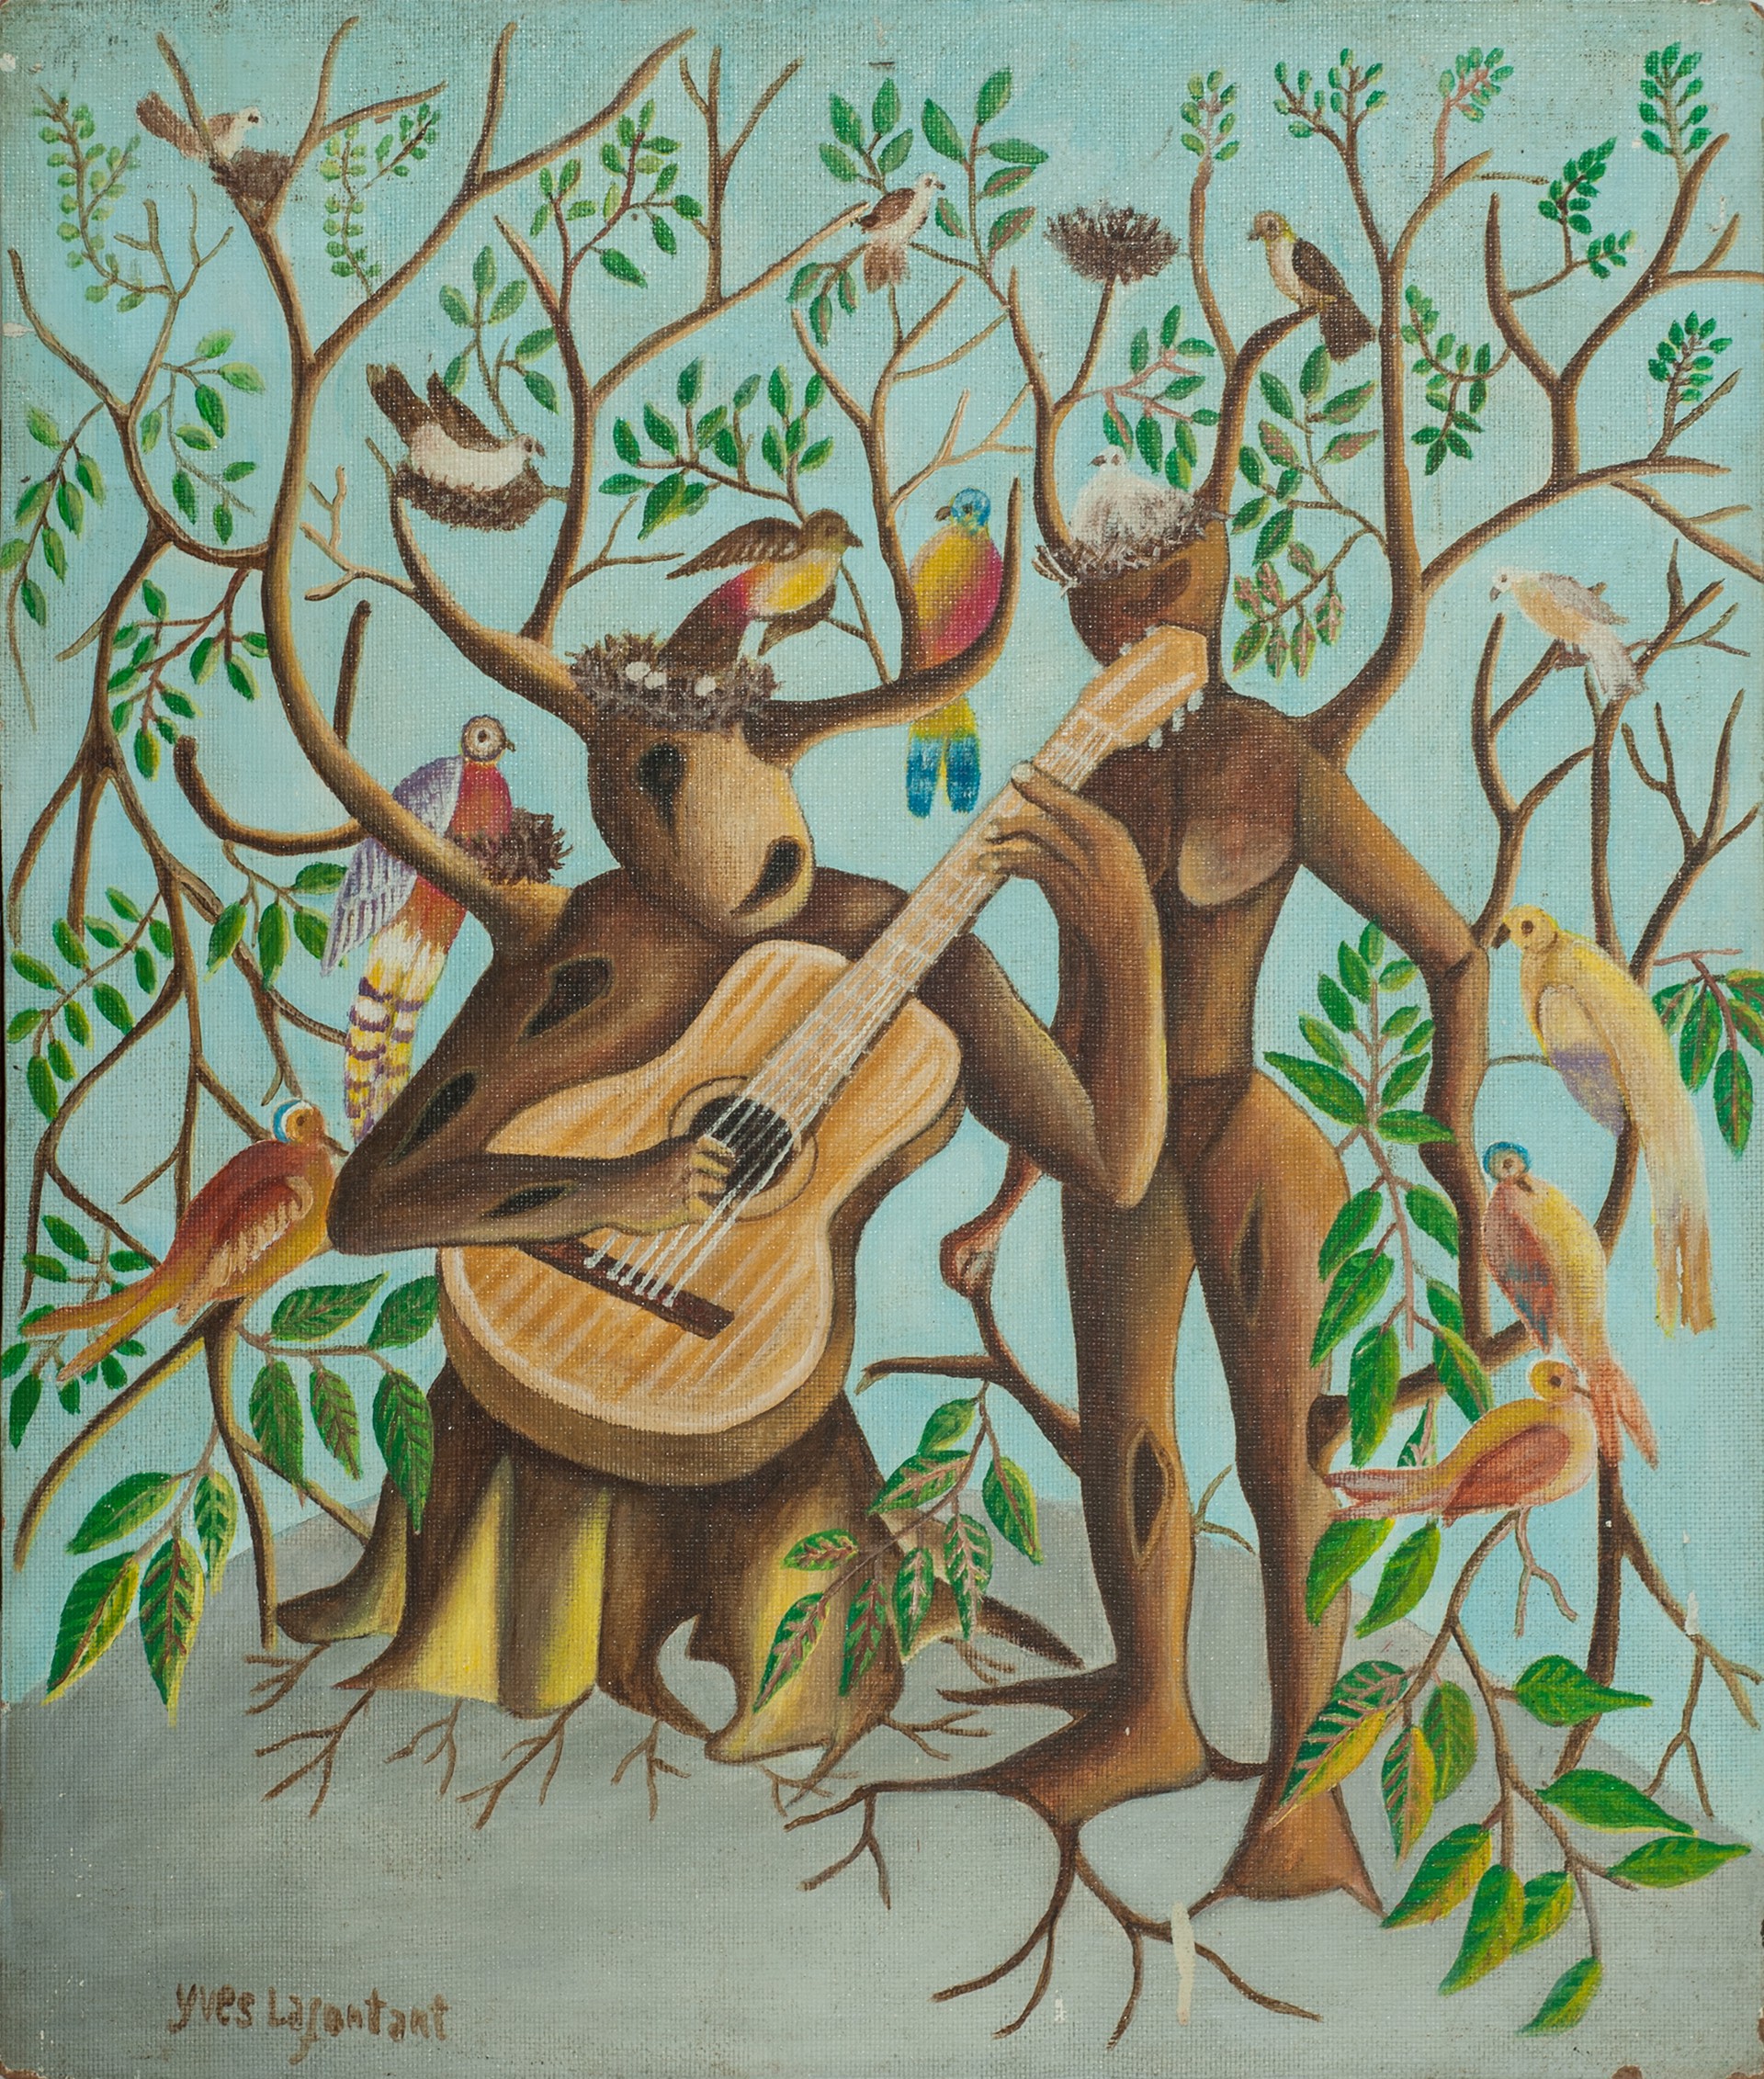 The Tree Guitarist #6-3-96GSN by Yves Lafontant (Haitian, b.1939)